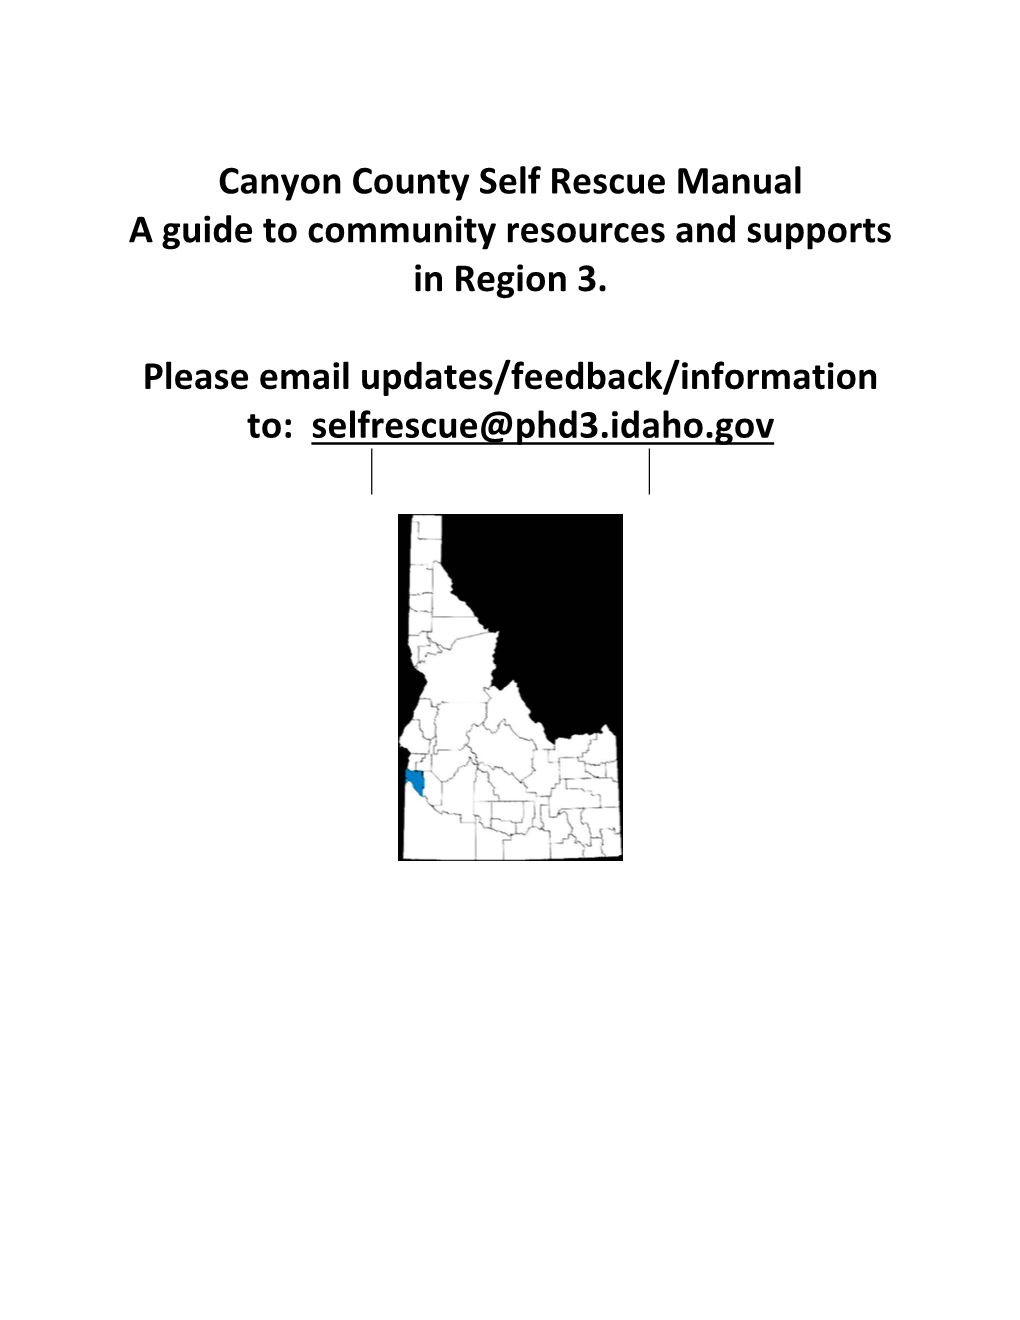 Canyon County Self Rescue Manual a Guide to Community Resources and Supports in Region 3